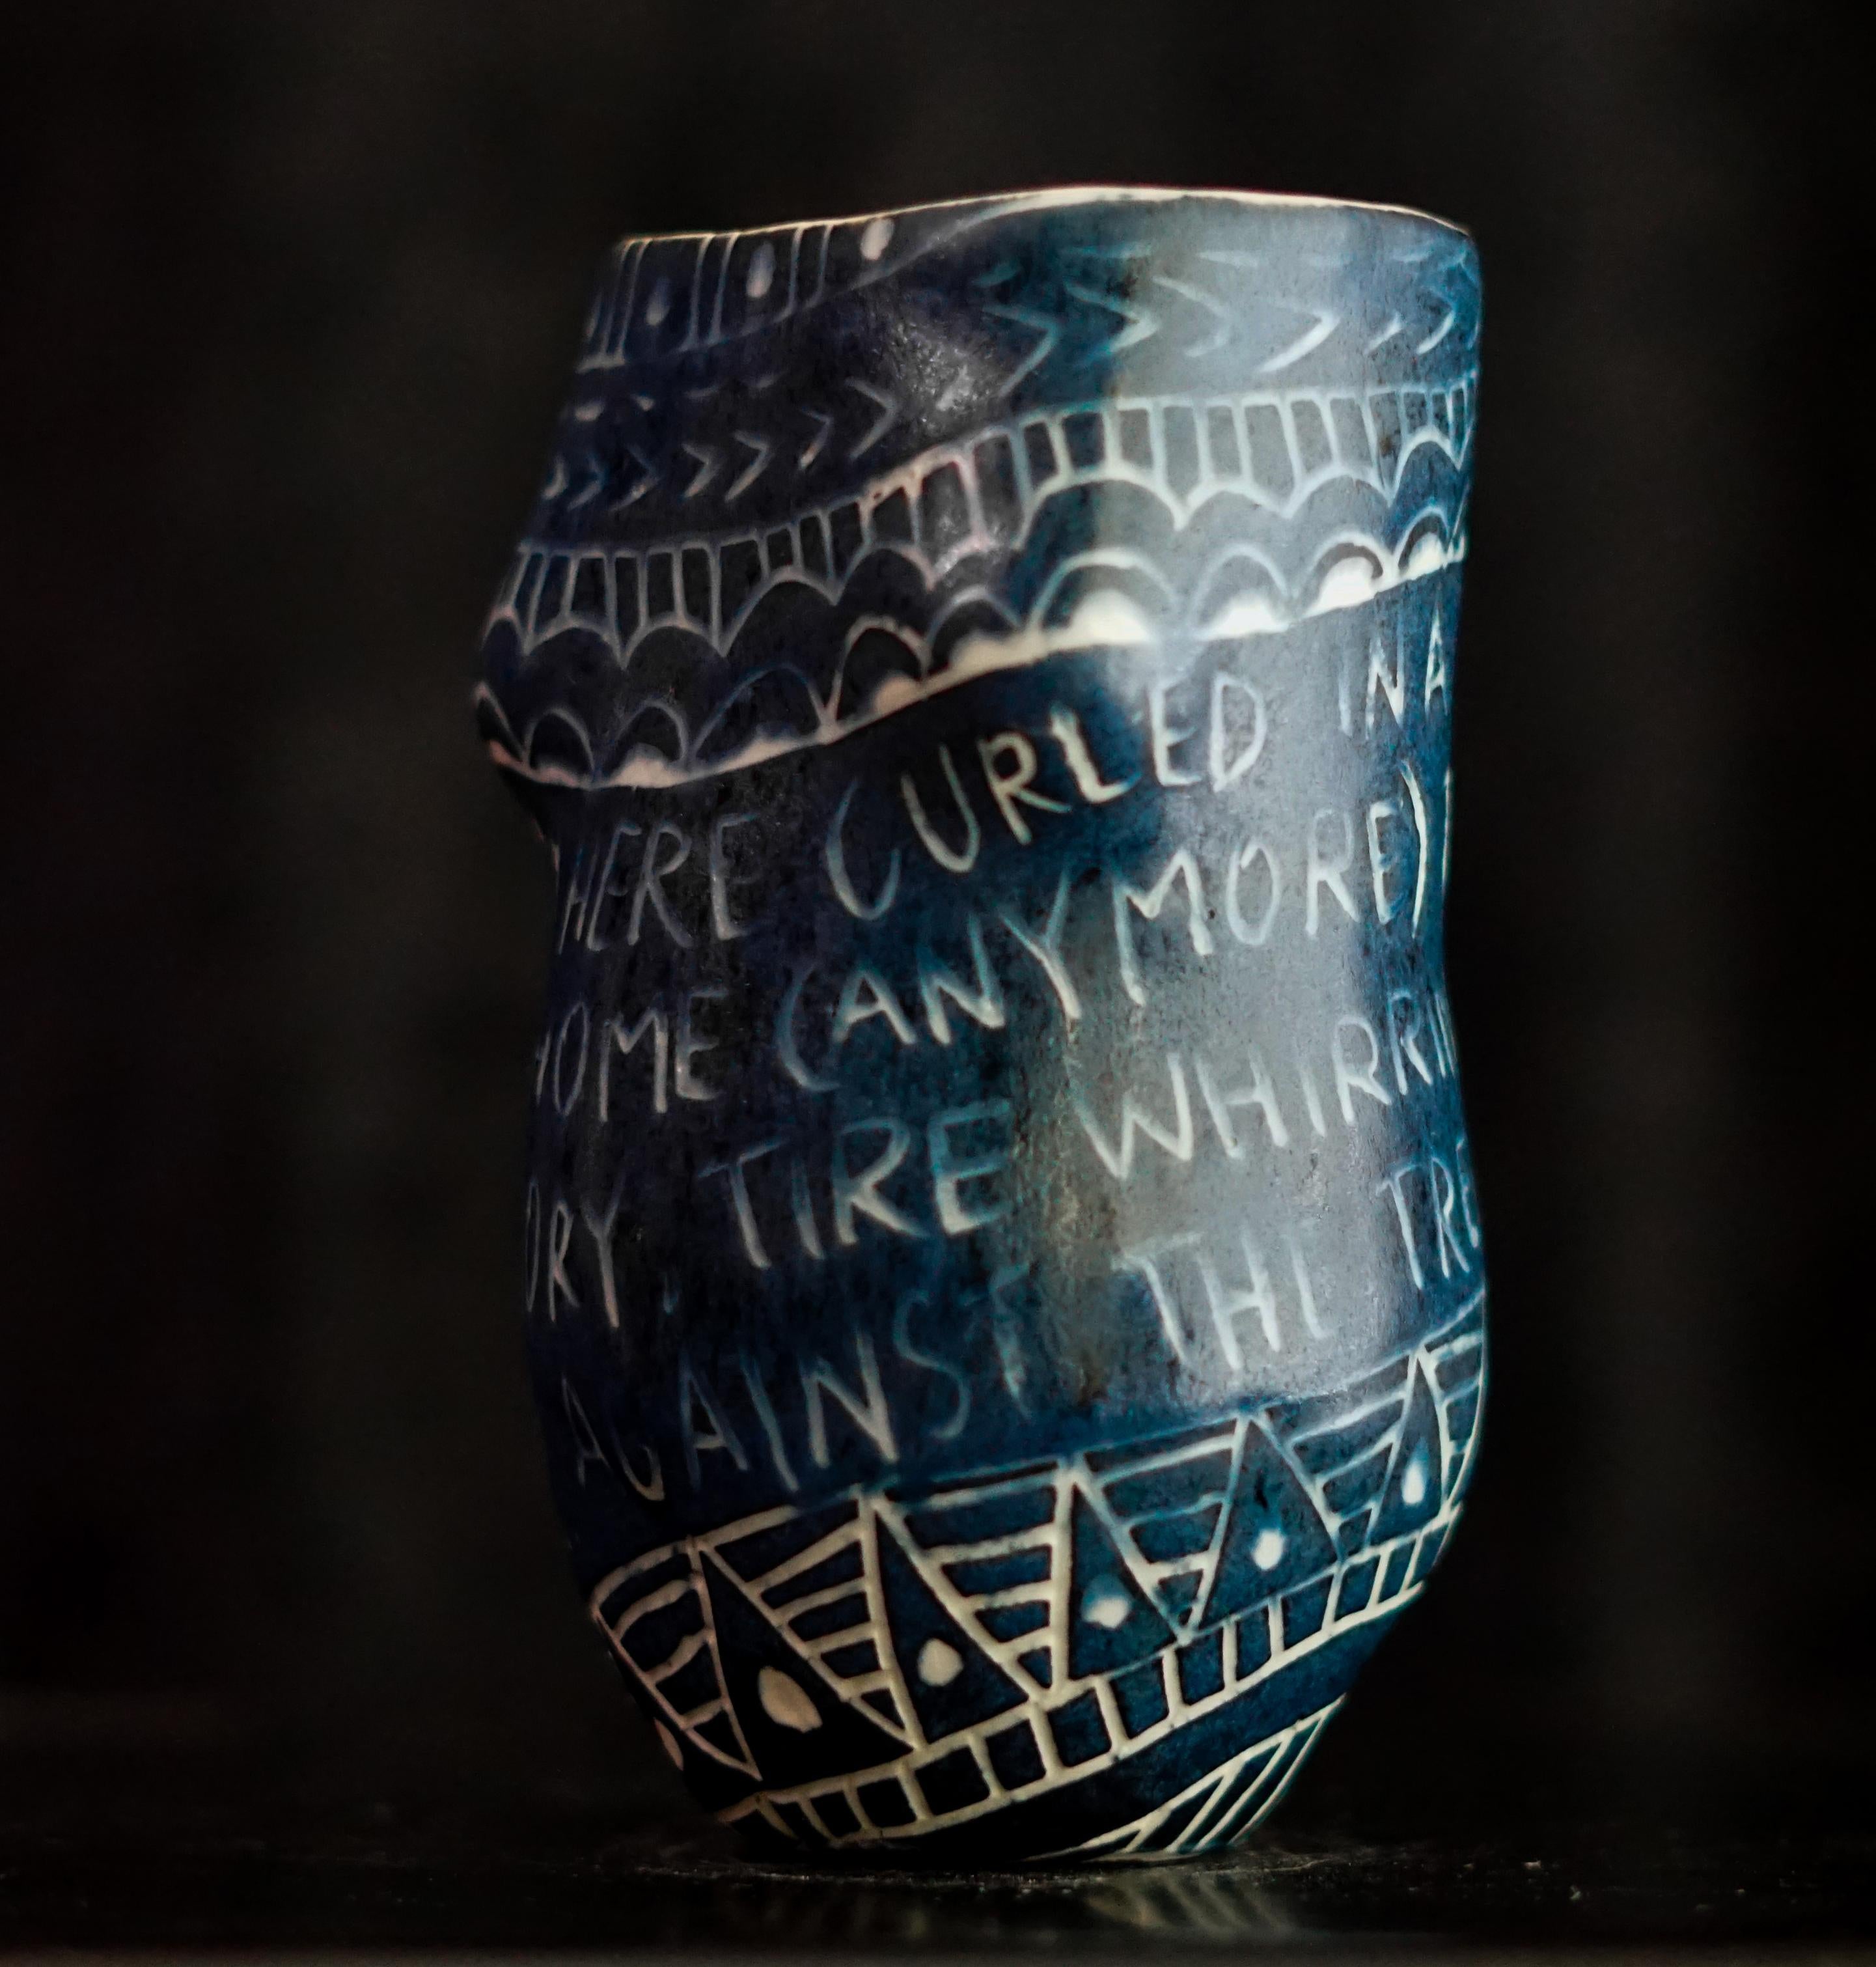 “So I Lay Here...” 2019
From the series Fragments of Our Love Story
Porcelain cup with sgraffito detailing
5 x 3 x 3 inches.

“So I lay here..” So I lay here curled in a home that is not my home (anymore). The sound of the
memory. Tire whirring on